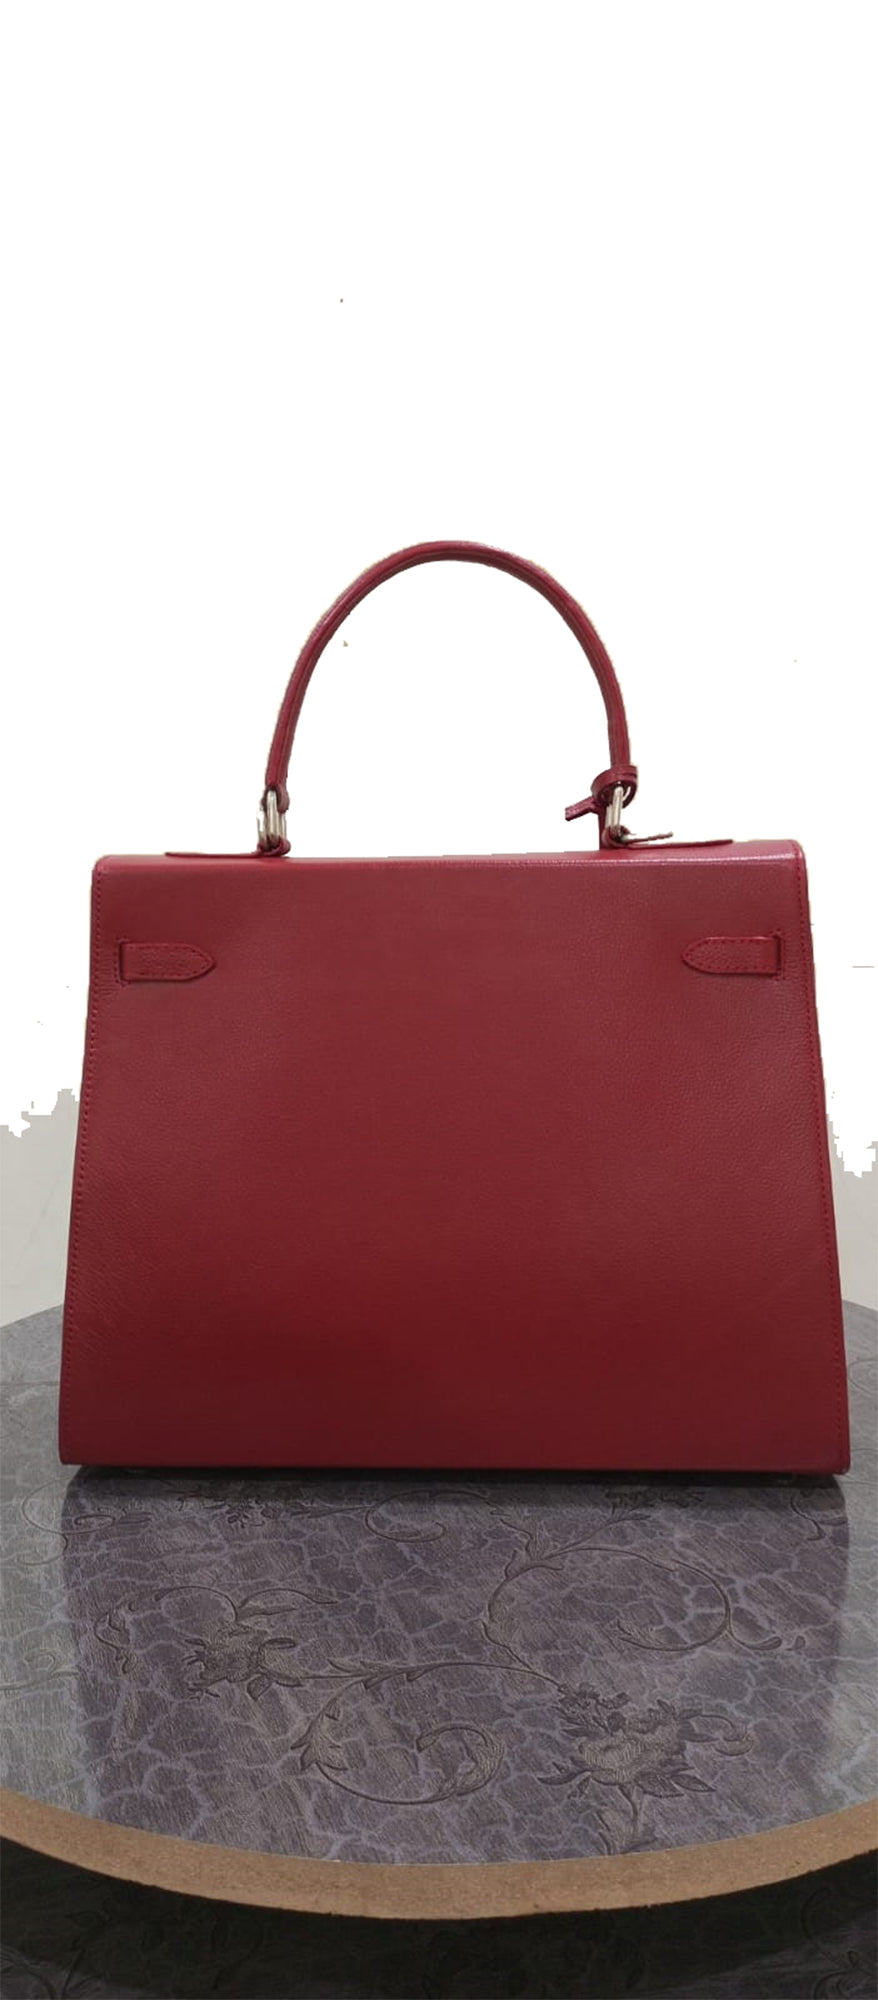 leather tote bag women hand bag red shoulder bag premium leathers bag for women genuine leather handbags handmade gift for her womens gift ideas